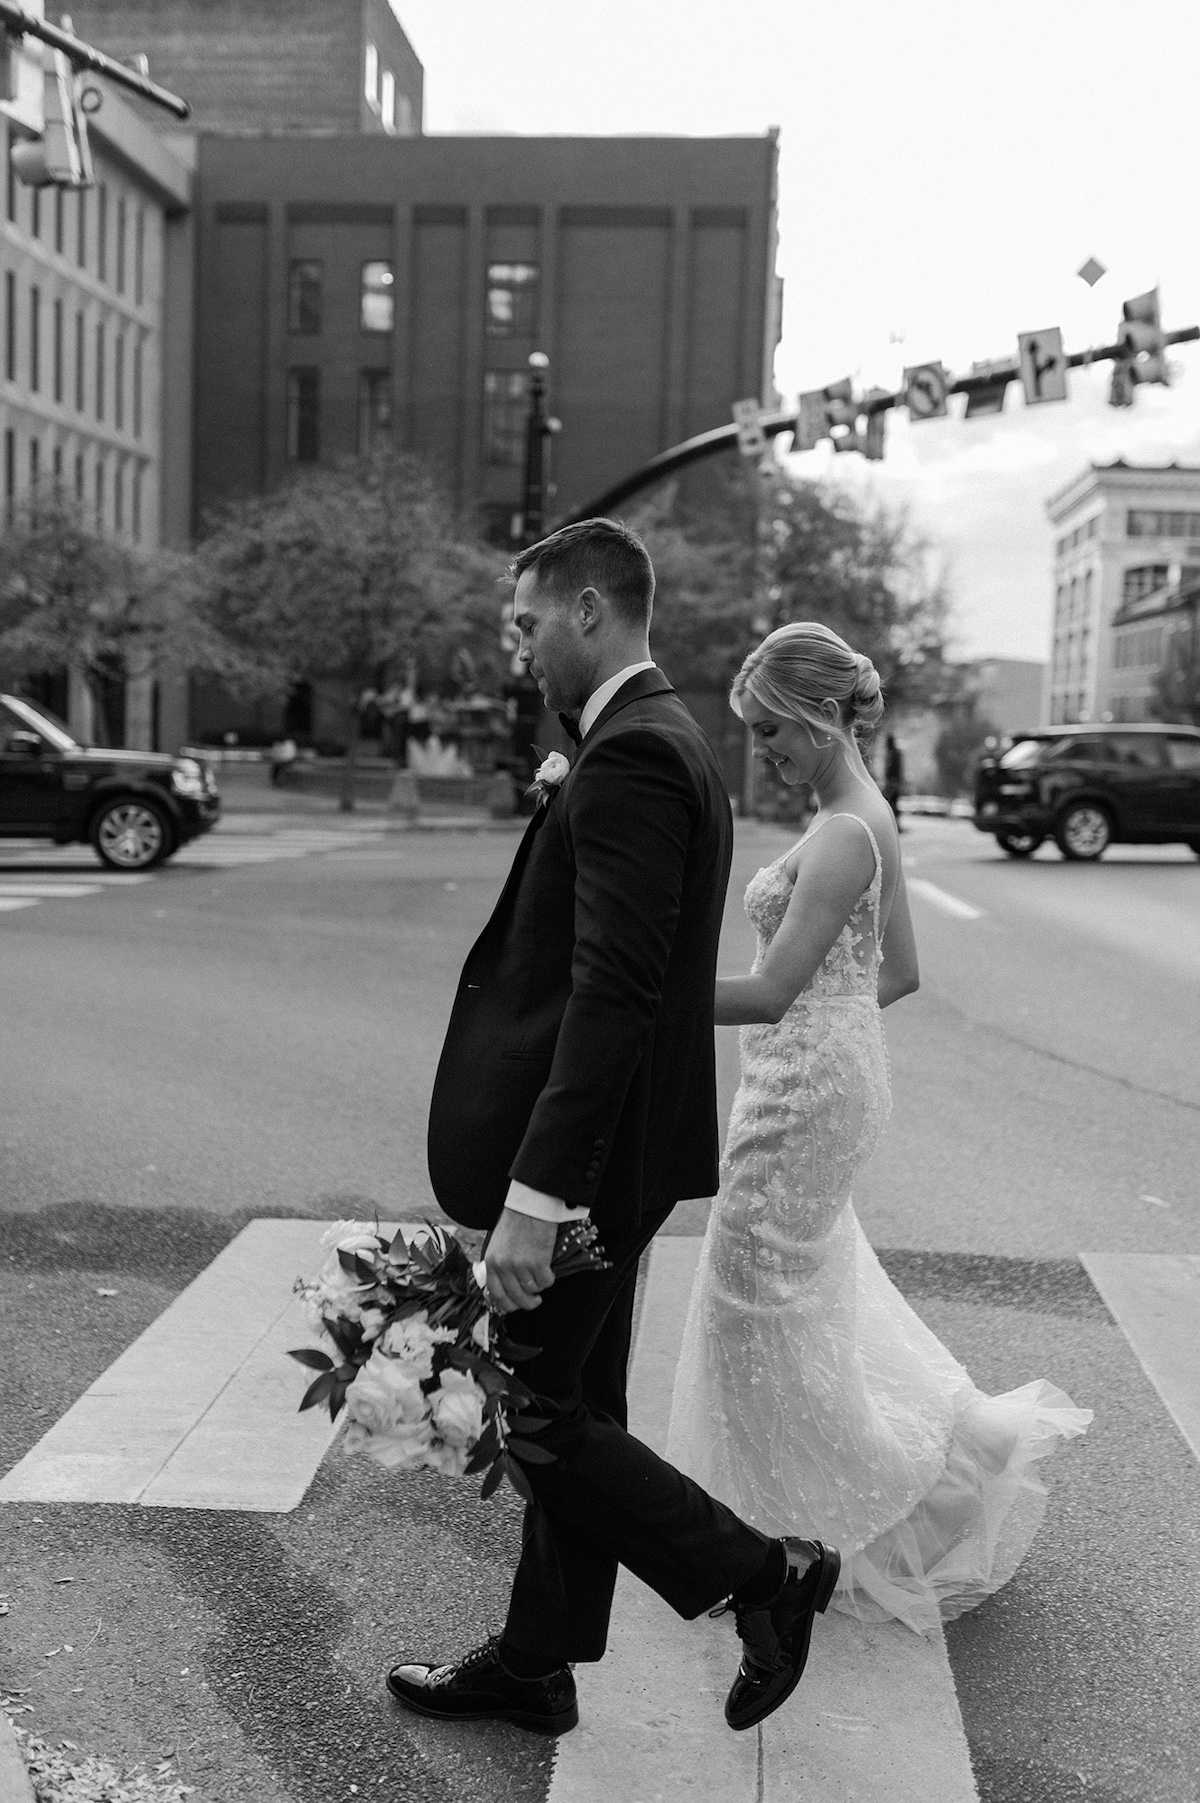 Enchanting editorial walk amidst Lancaster's charm, the newlyweds immersed in the high-end allure of the city's picturesque surroundings.